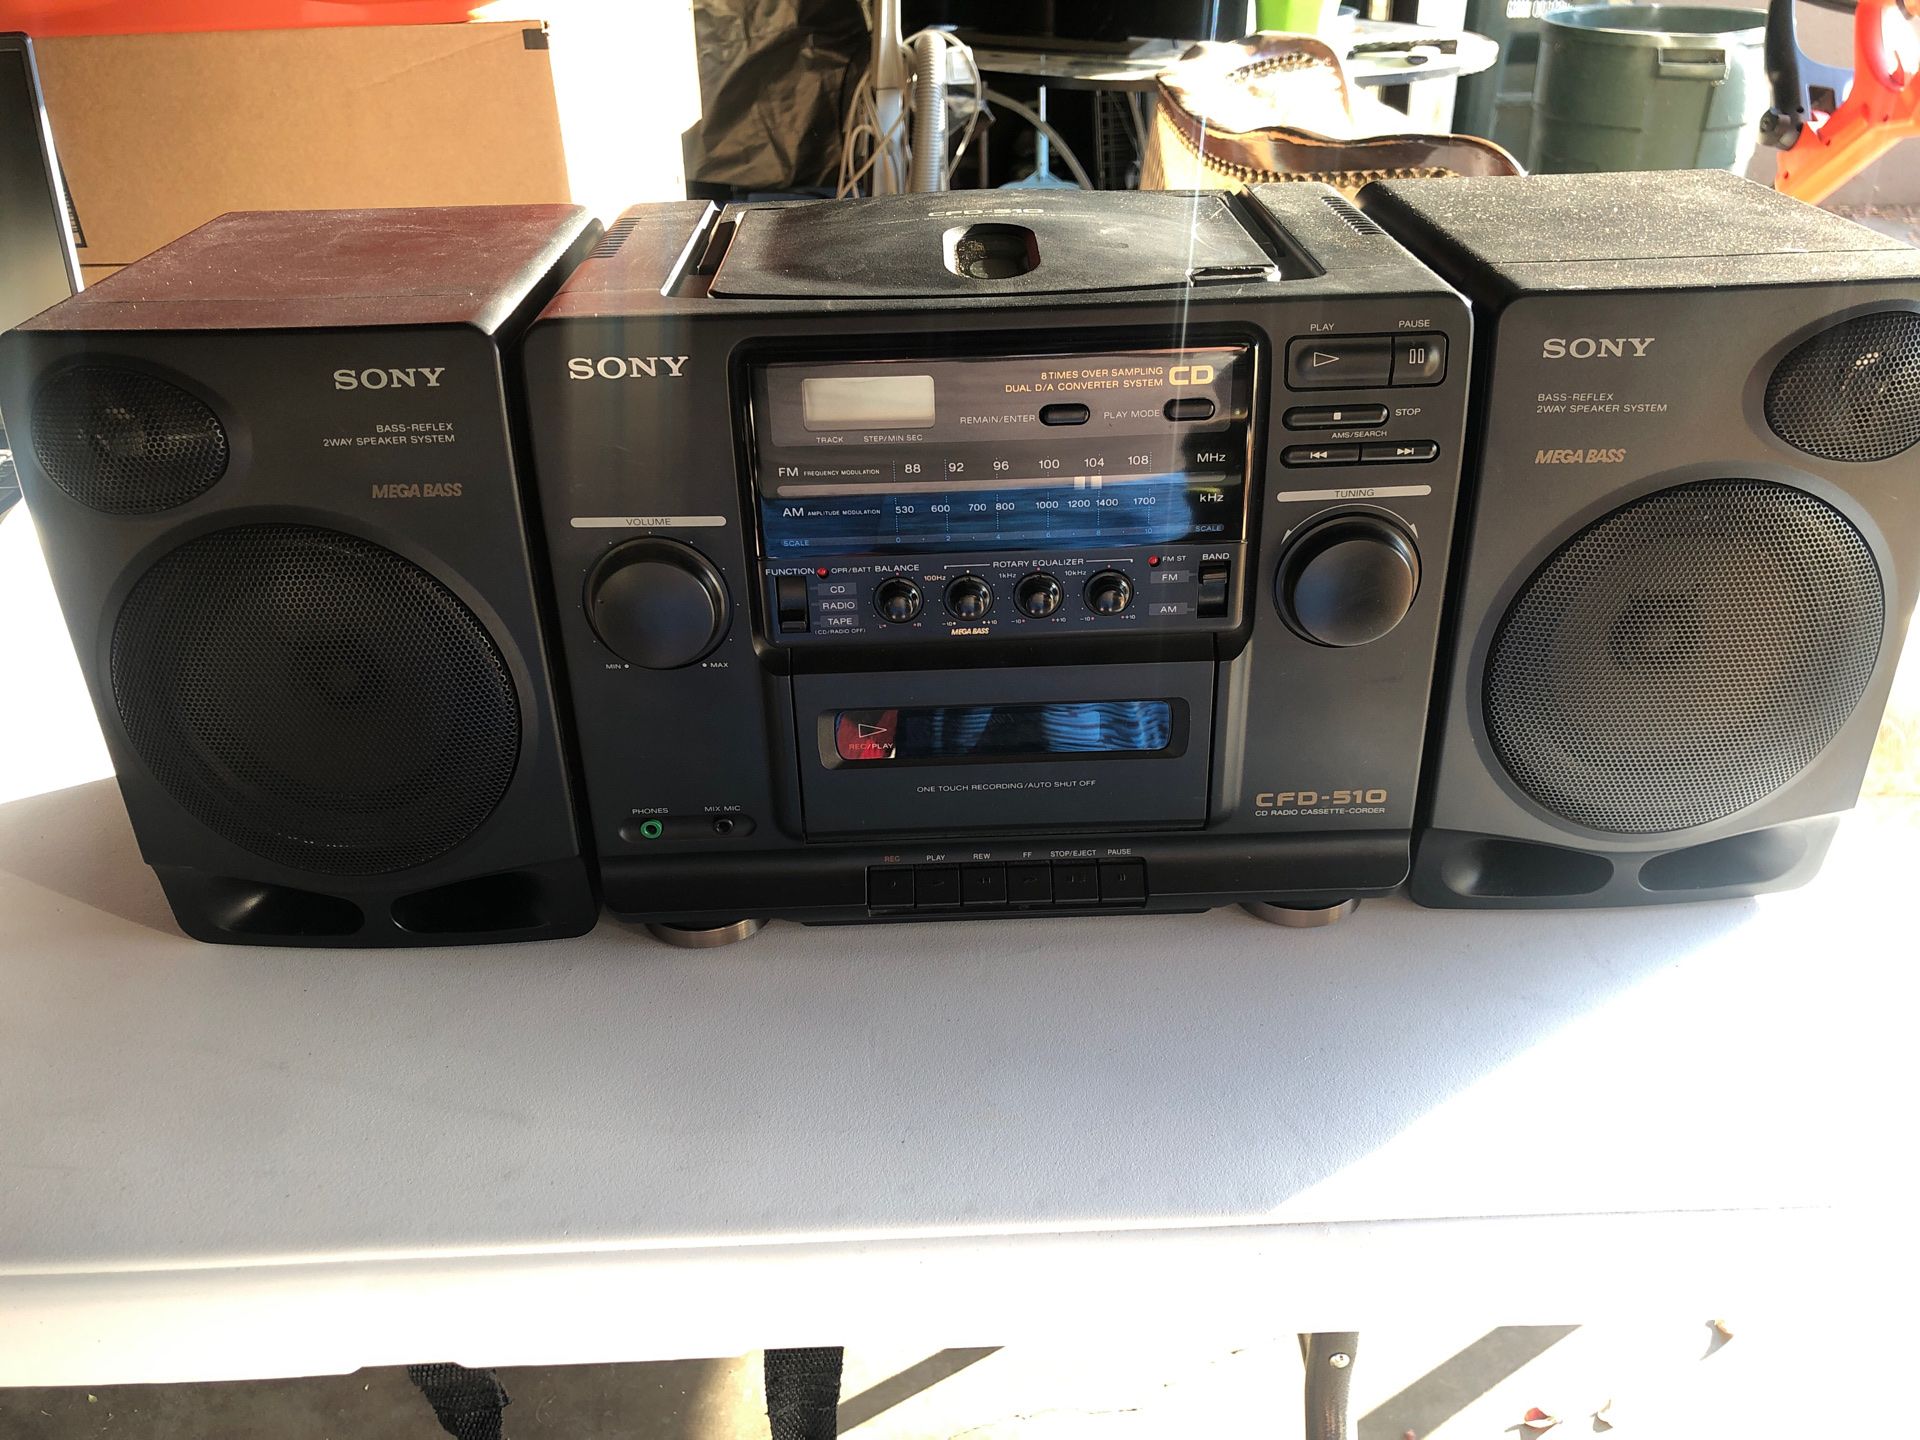 Sony CFD-510 Stereo System